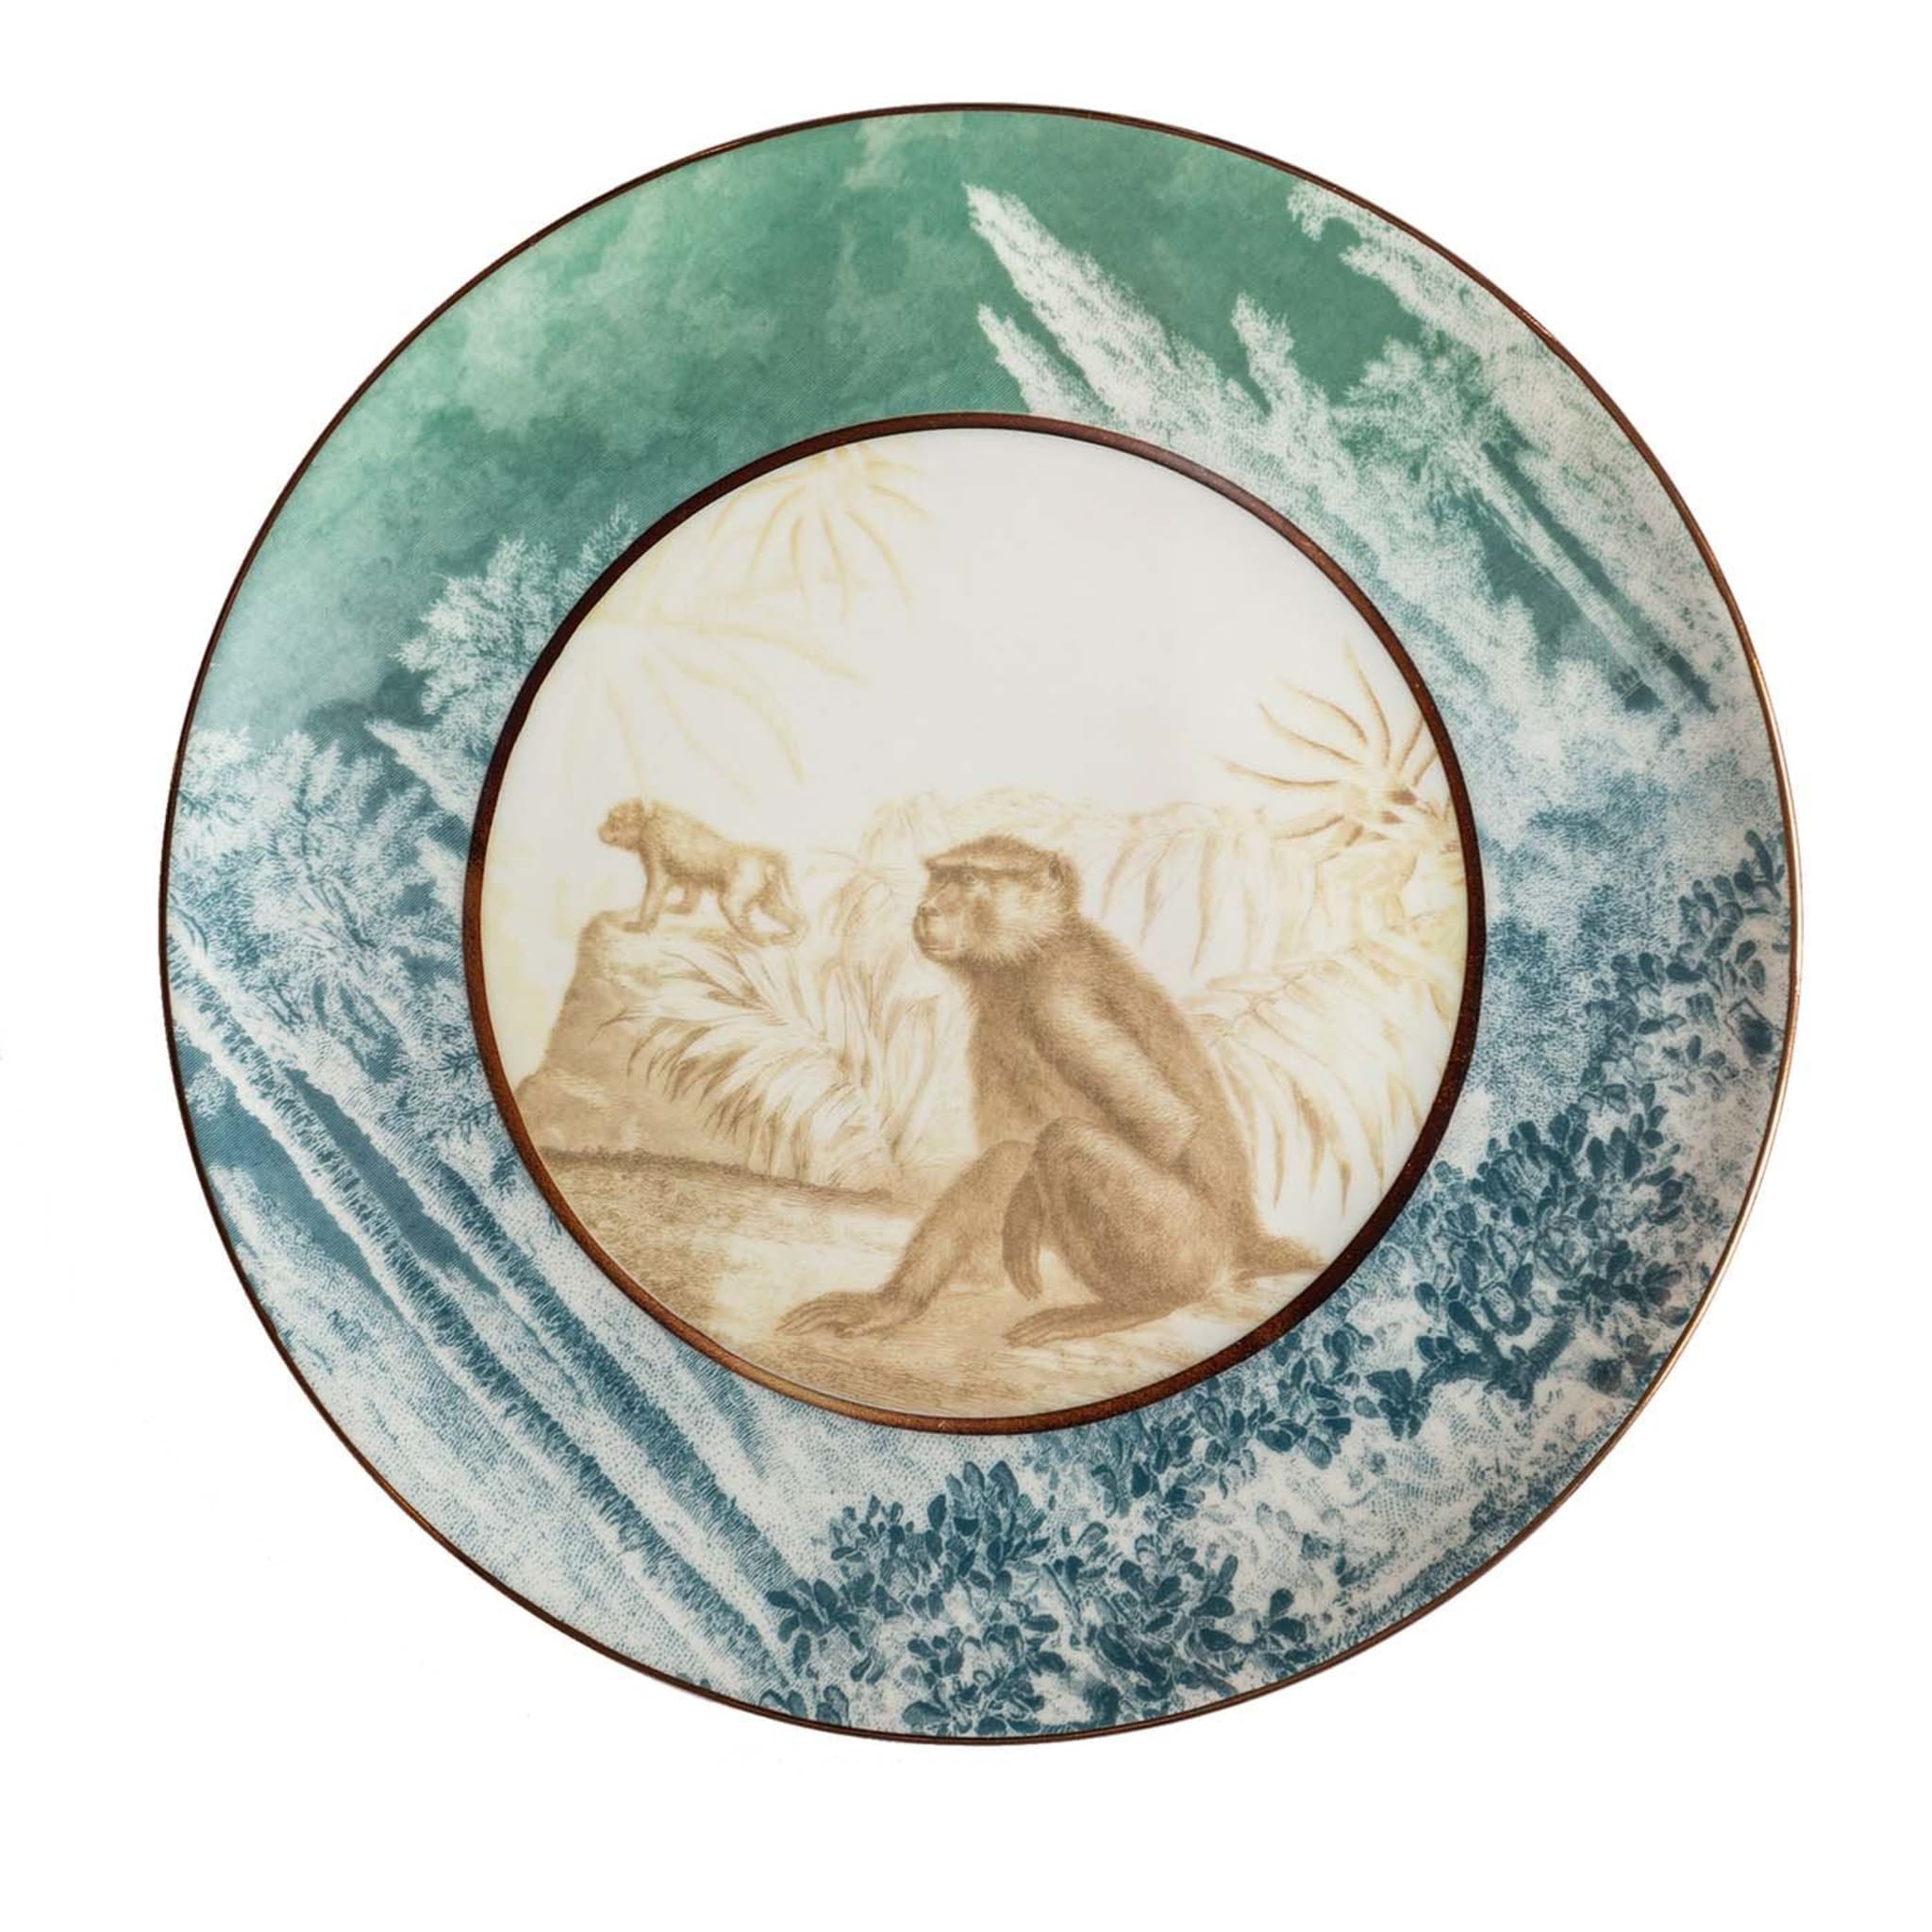 Galtaji Porcelain Dinner Plate With Landscape And Monkeys #2 - Main view